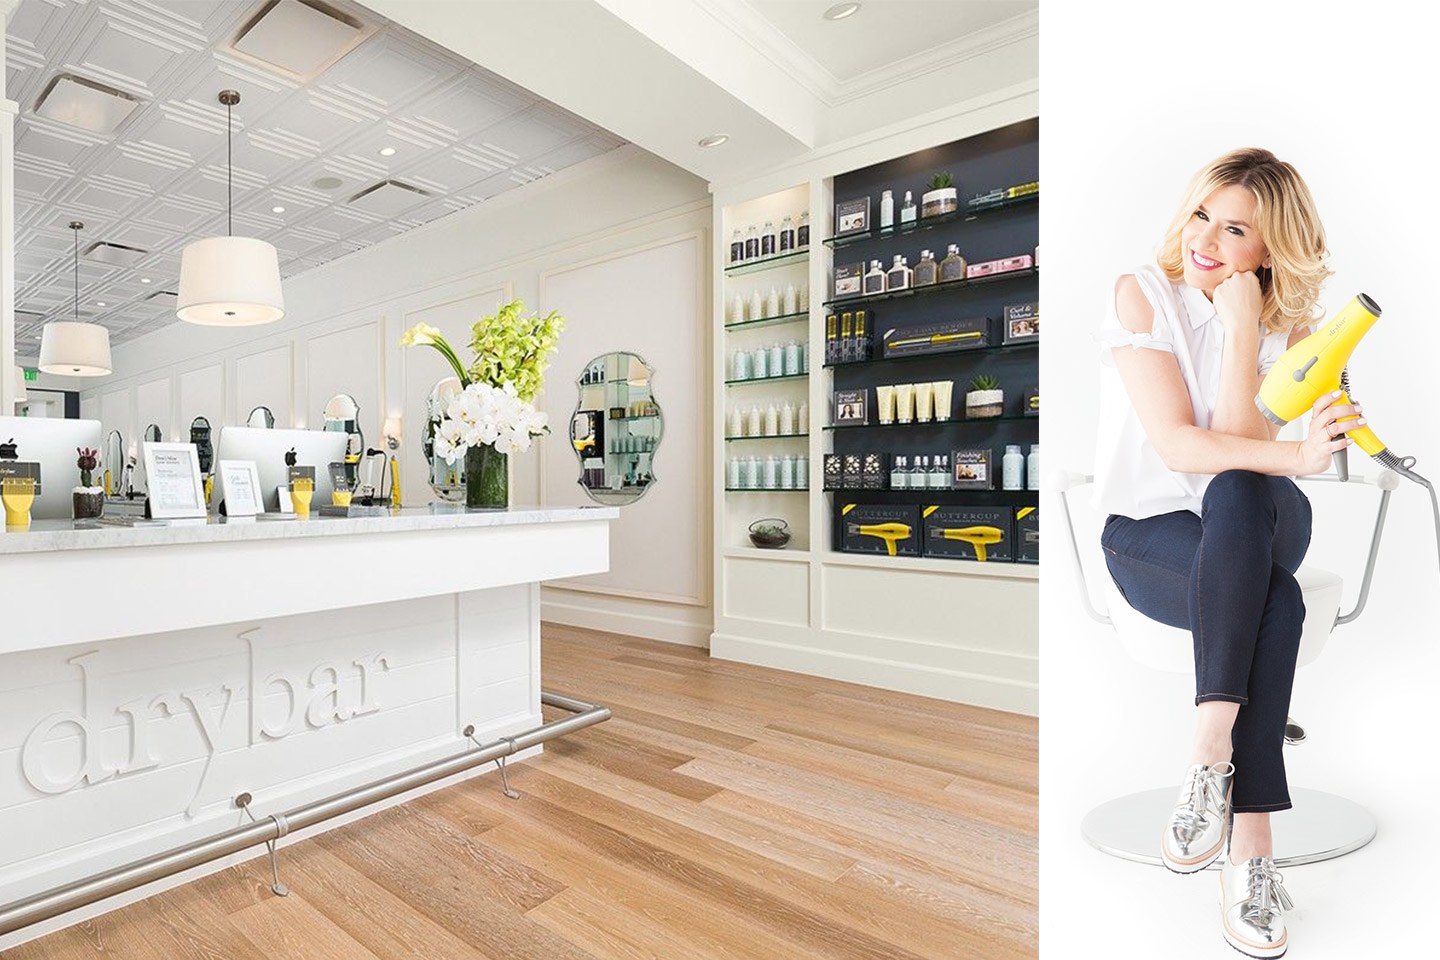 Customer Service Examples: The Drybar store and founder